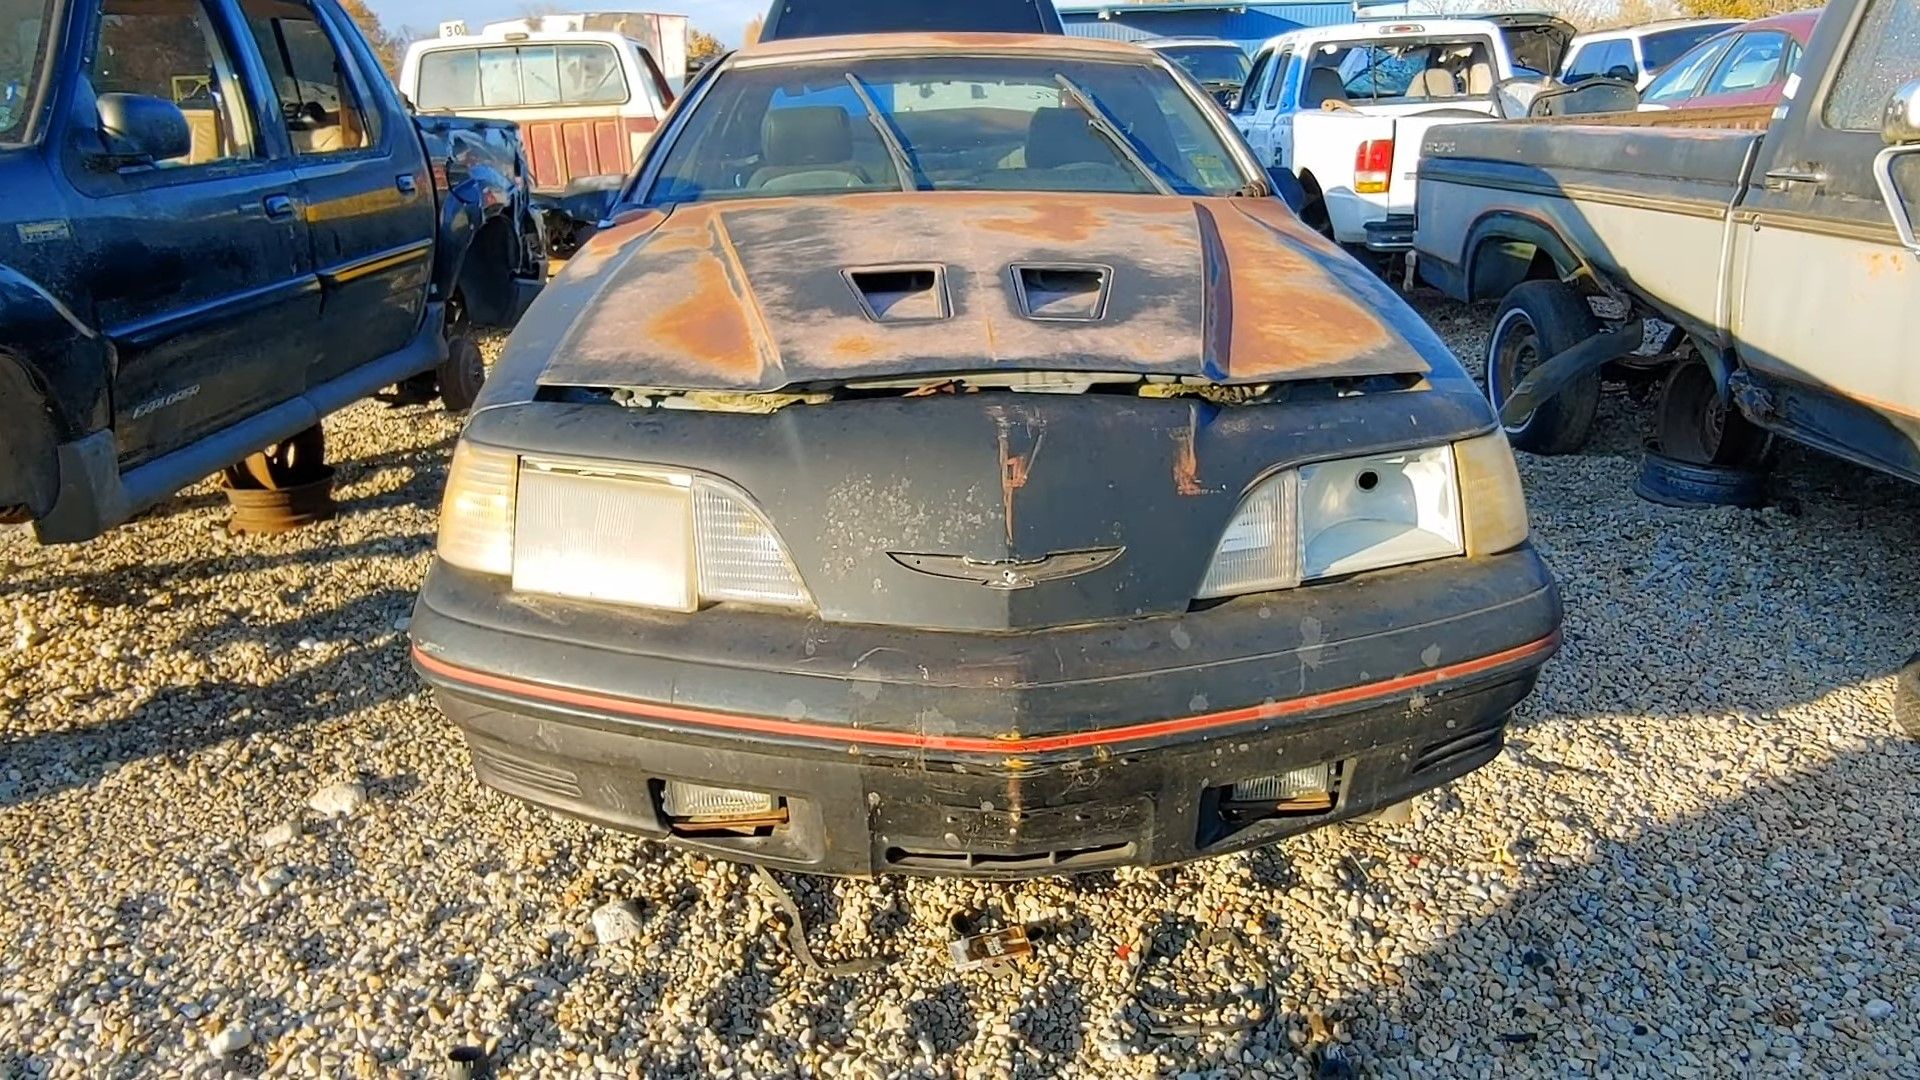 A black 1988 Ford Thunderbird Turbo Coupe junkyard find front shot  